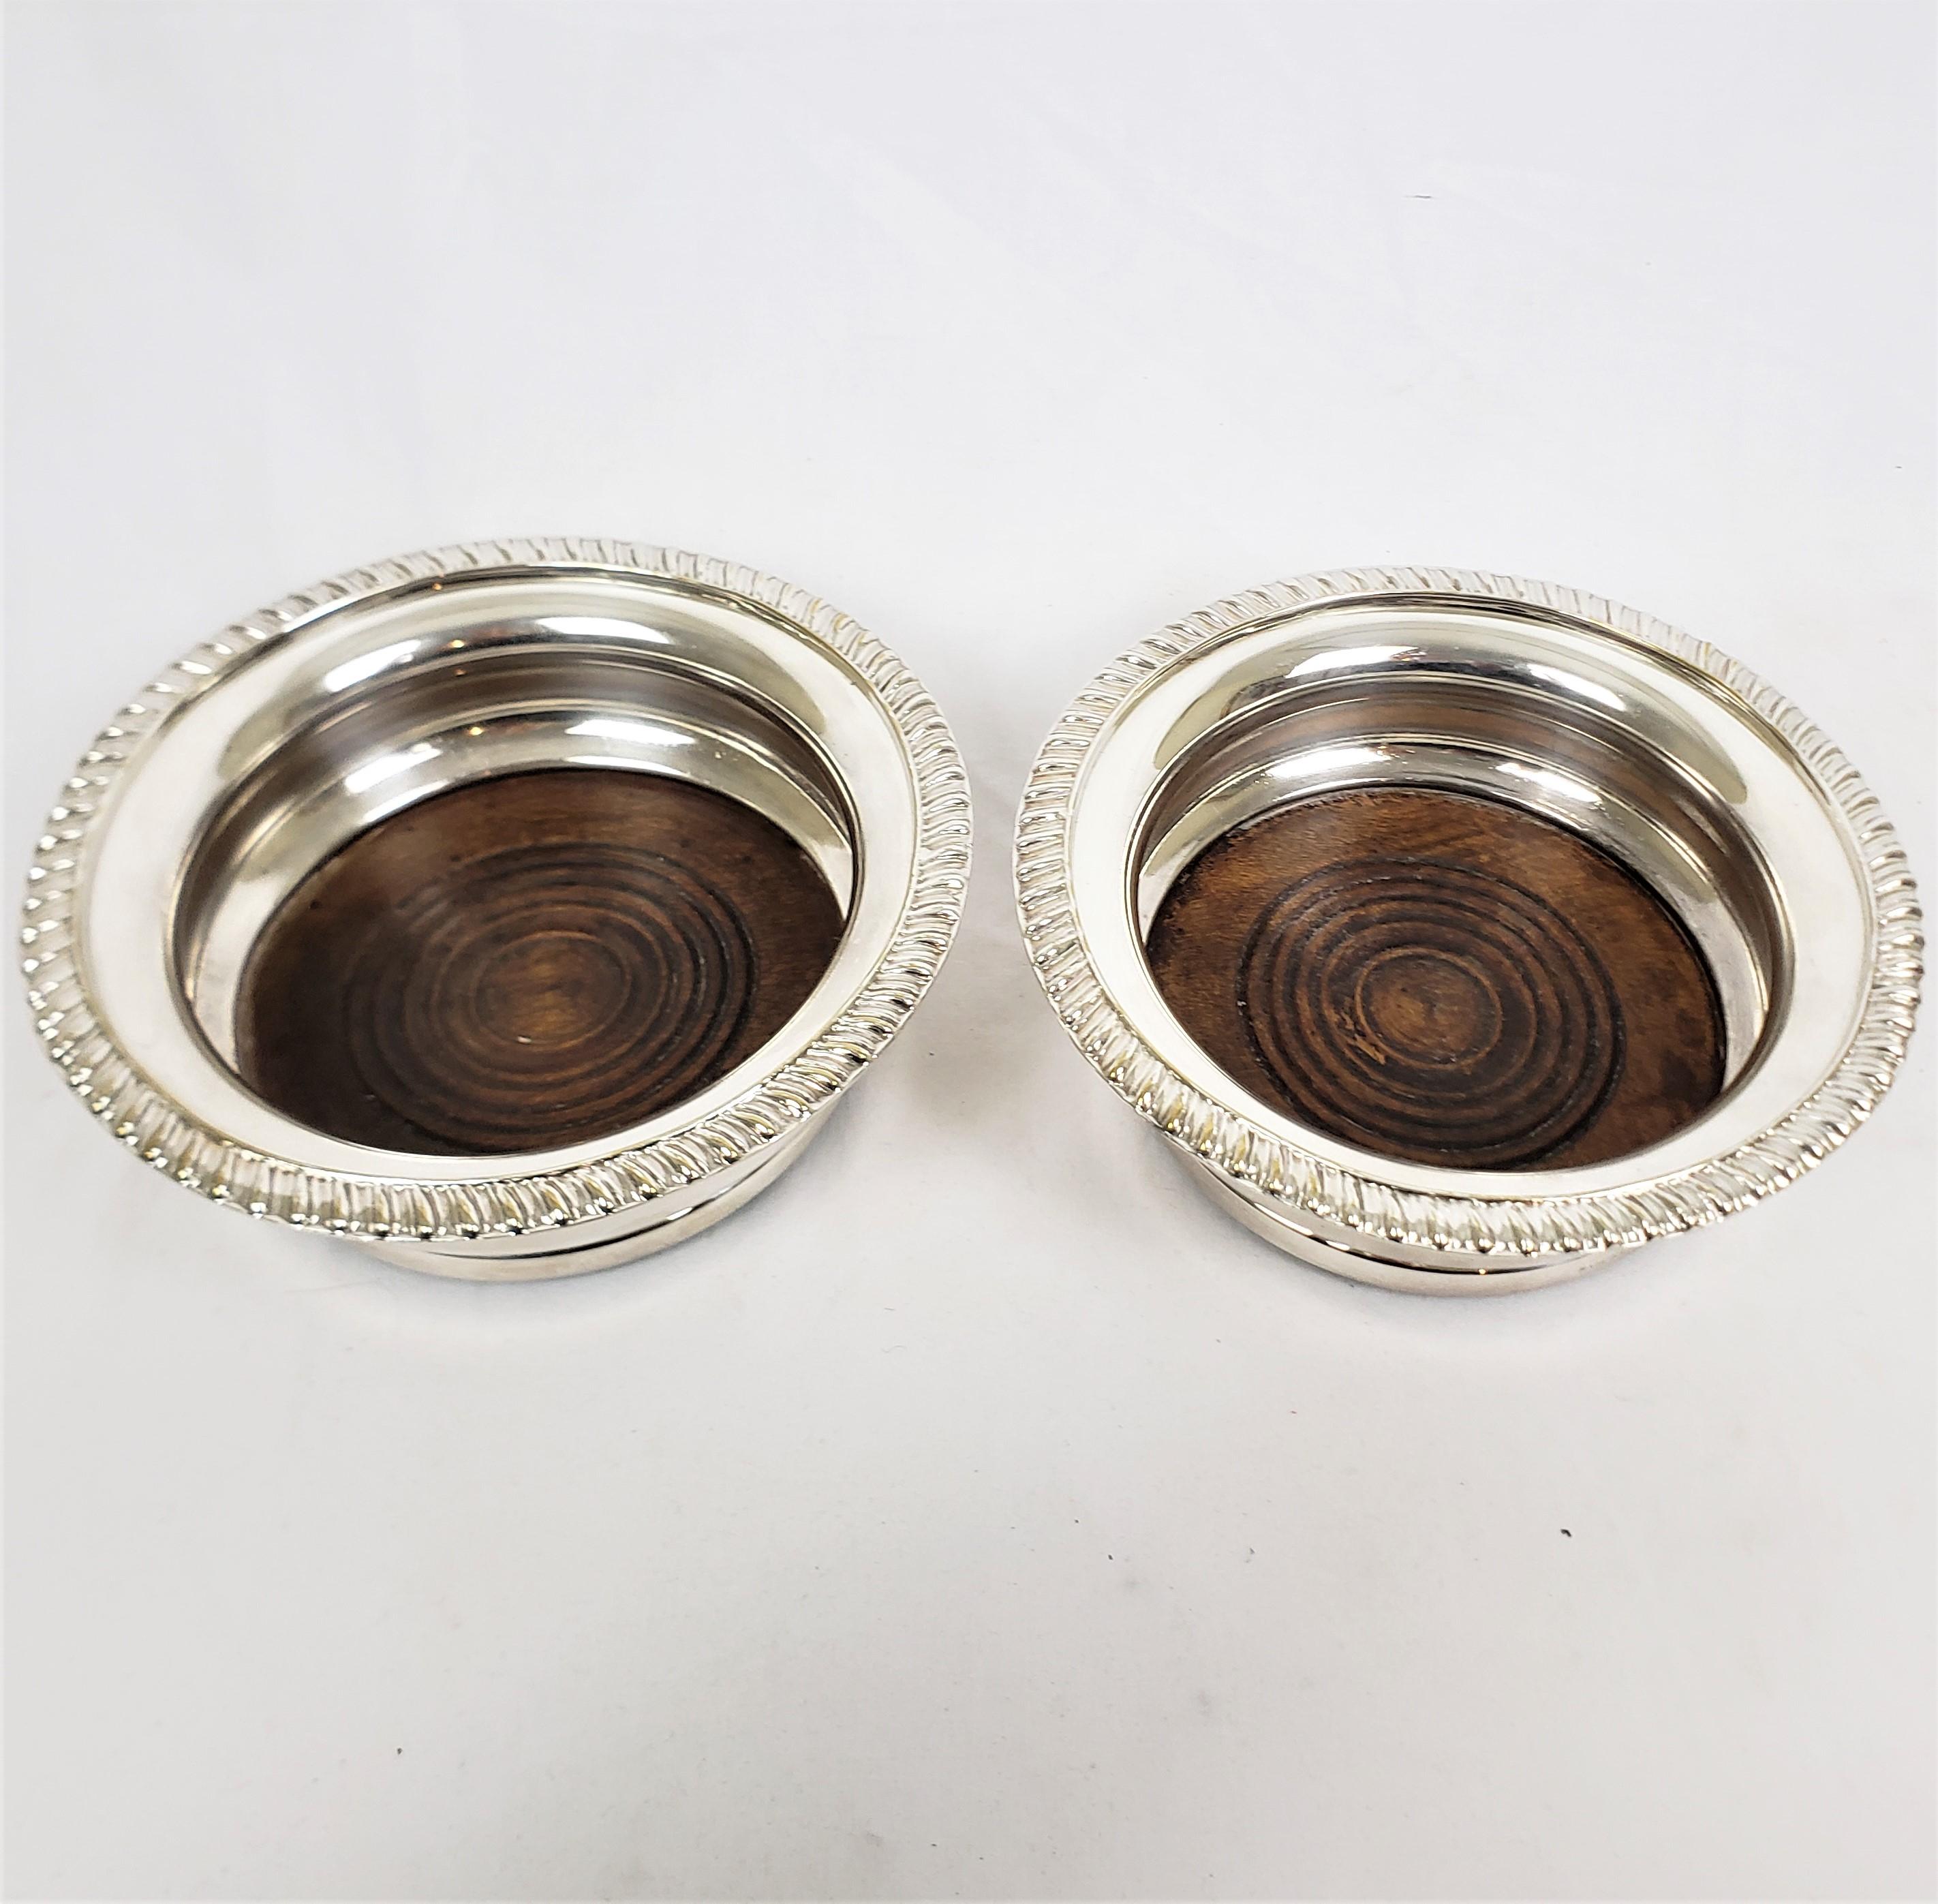 Pair of Antique English Silver Plated Bottle Coasters with Turned Wooden Inserts In Good Condition For Sale In Hamilton, Ontario